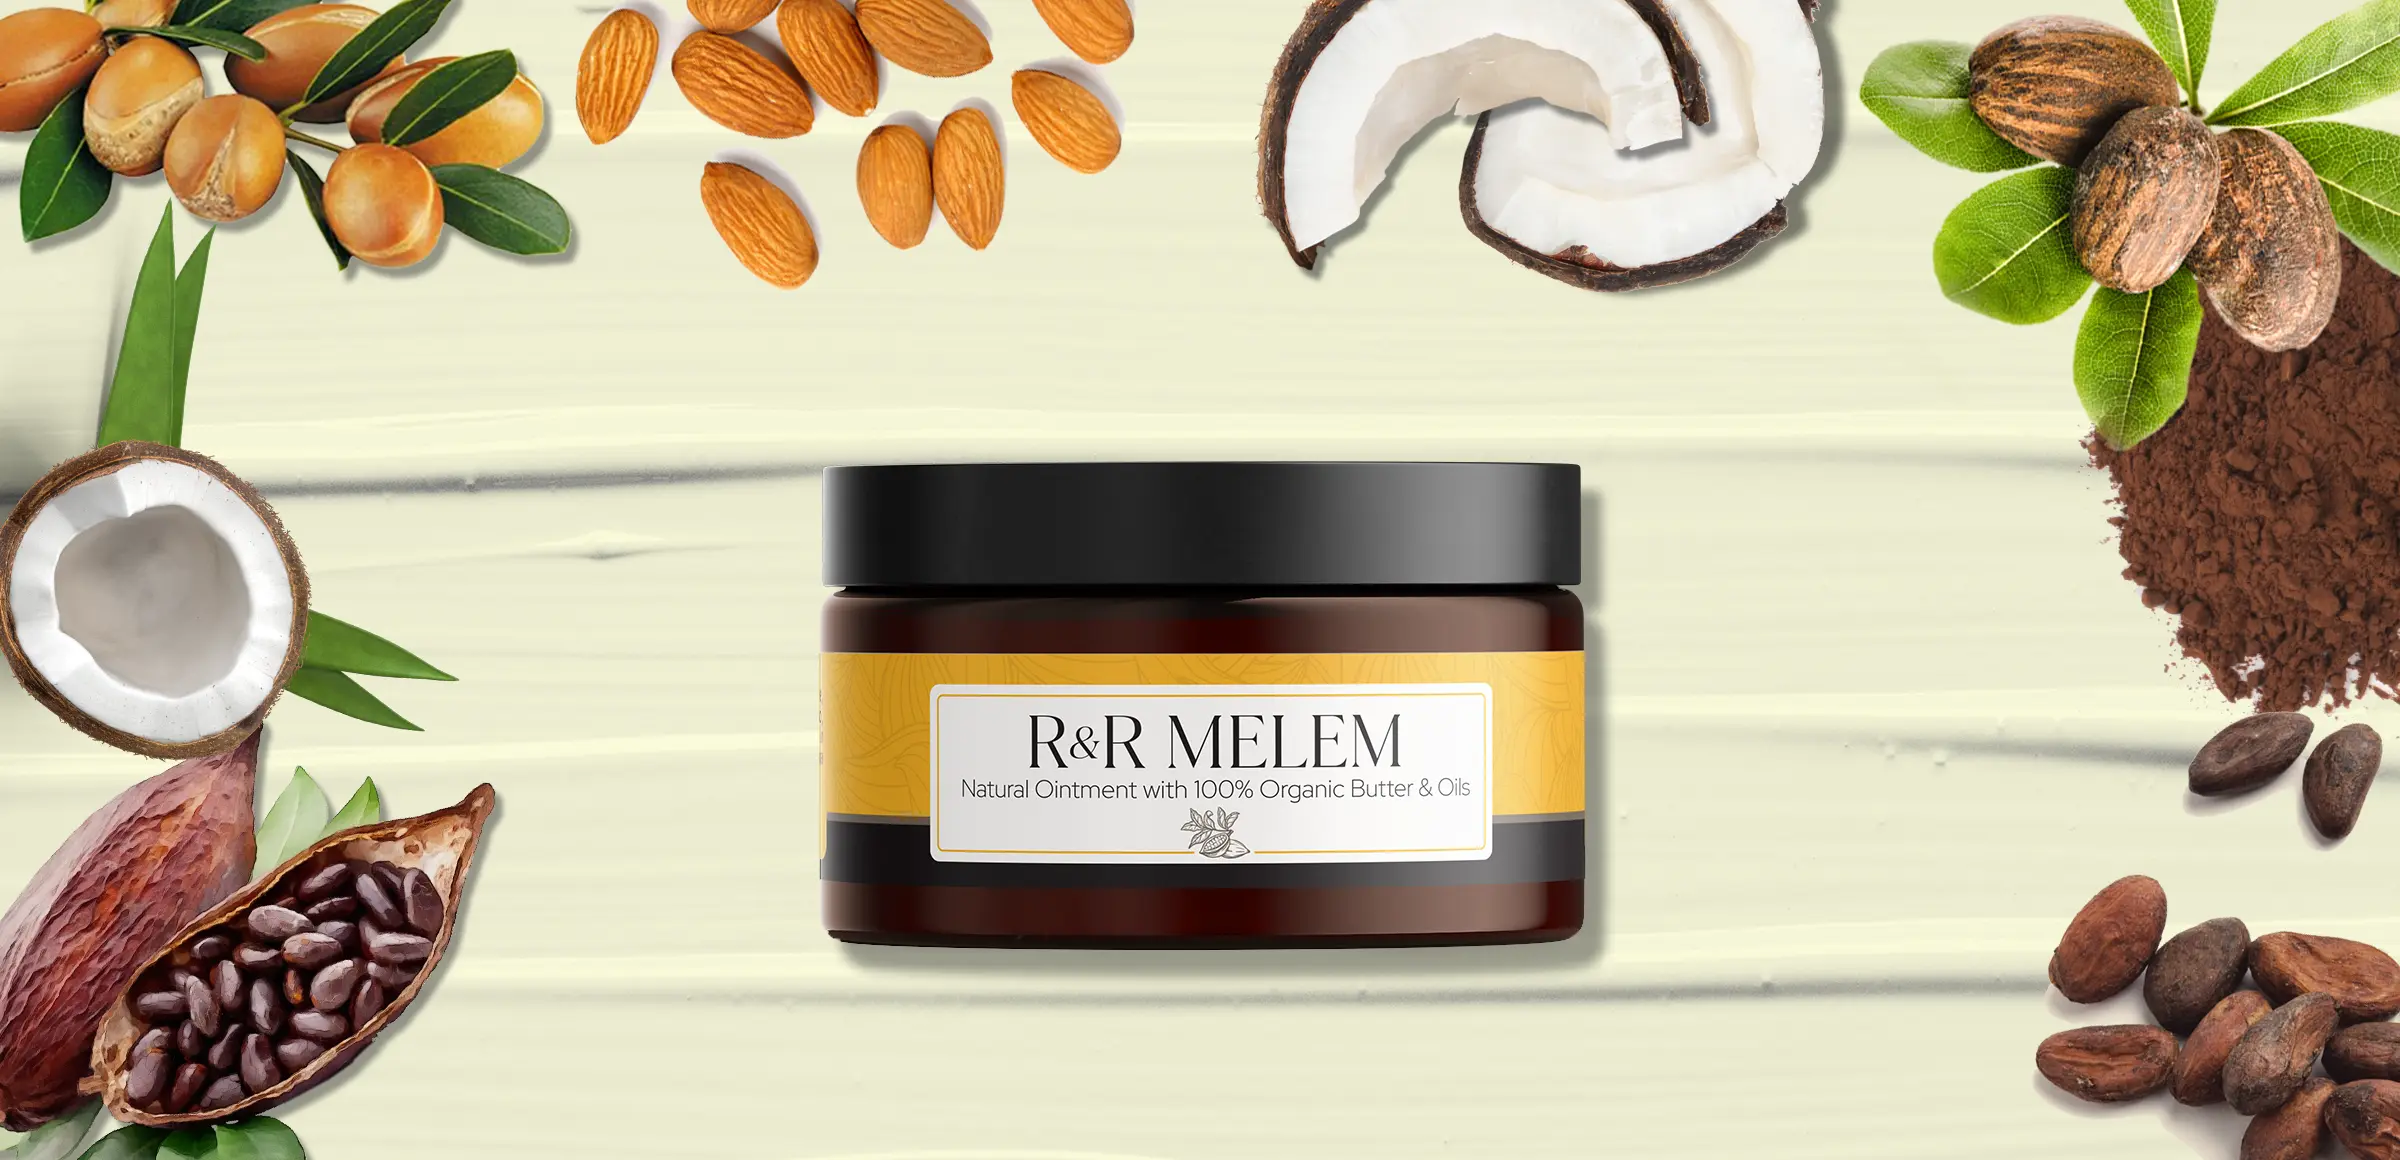 Packaging Label for R&R Melem on a mockup with all the ingredients around it